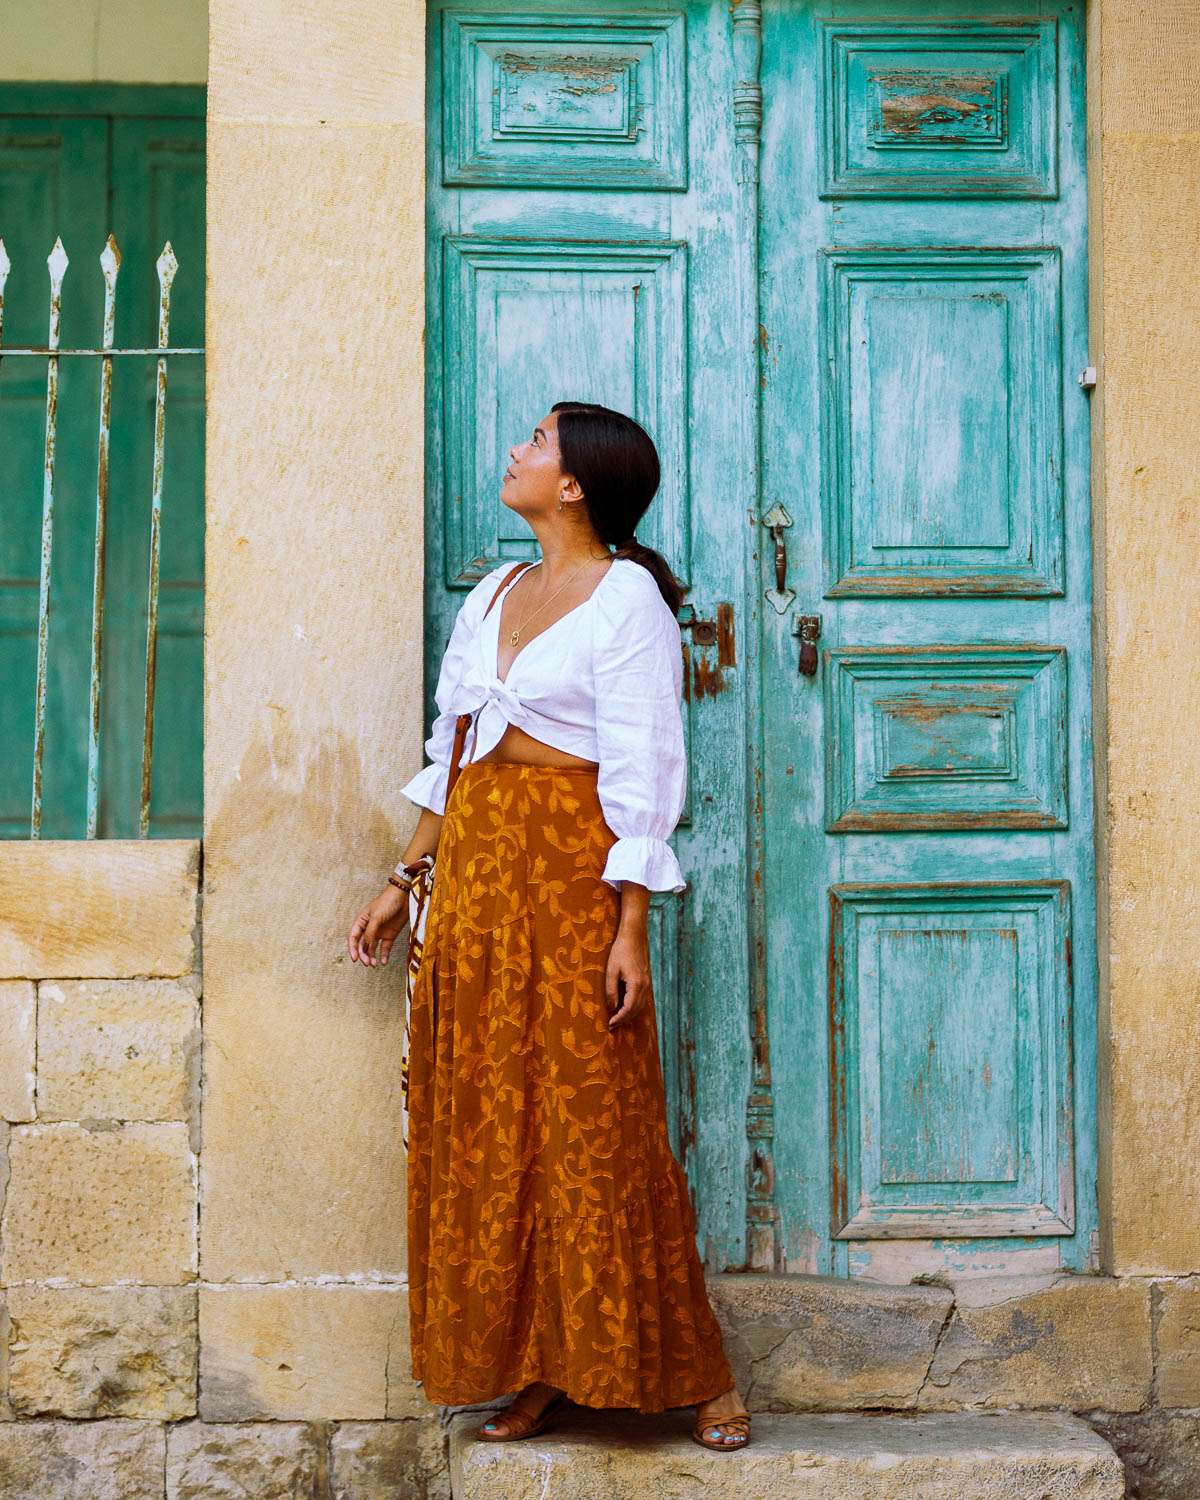 Rachel Off Duty: A Woman Stands in Front of a Blue Door in The Chouf, Lebanon